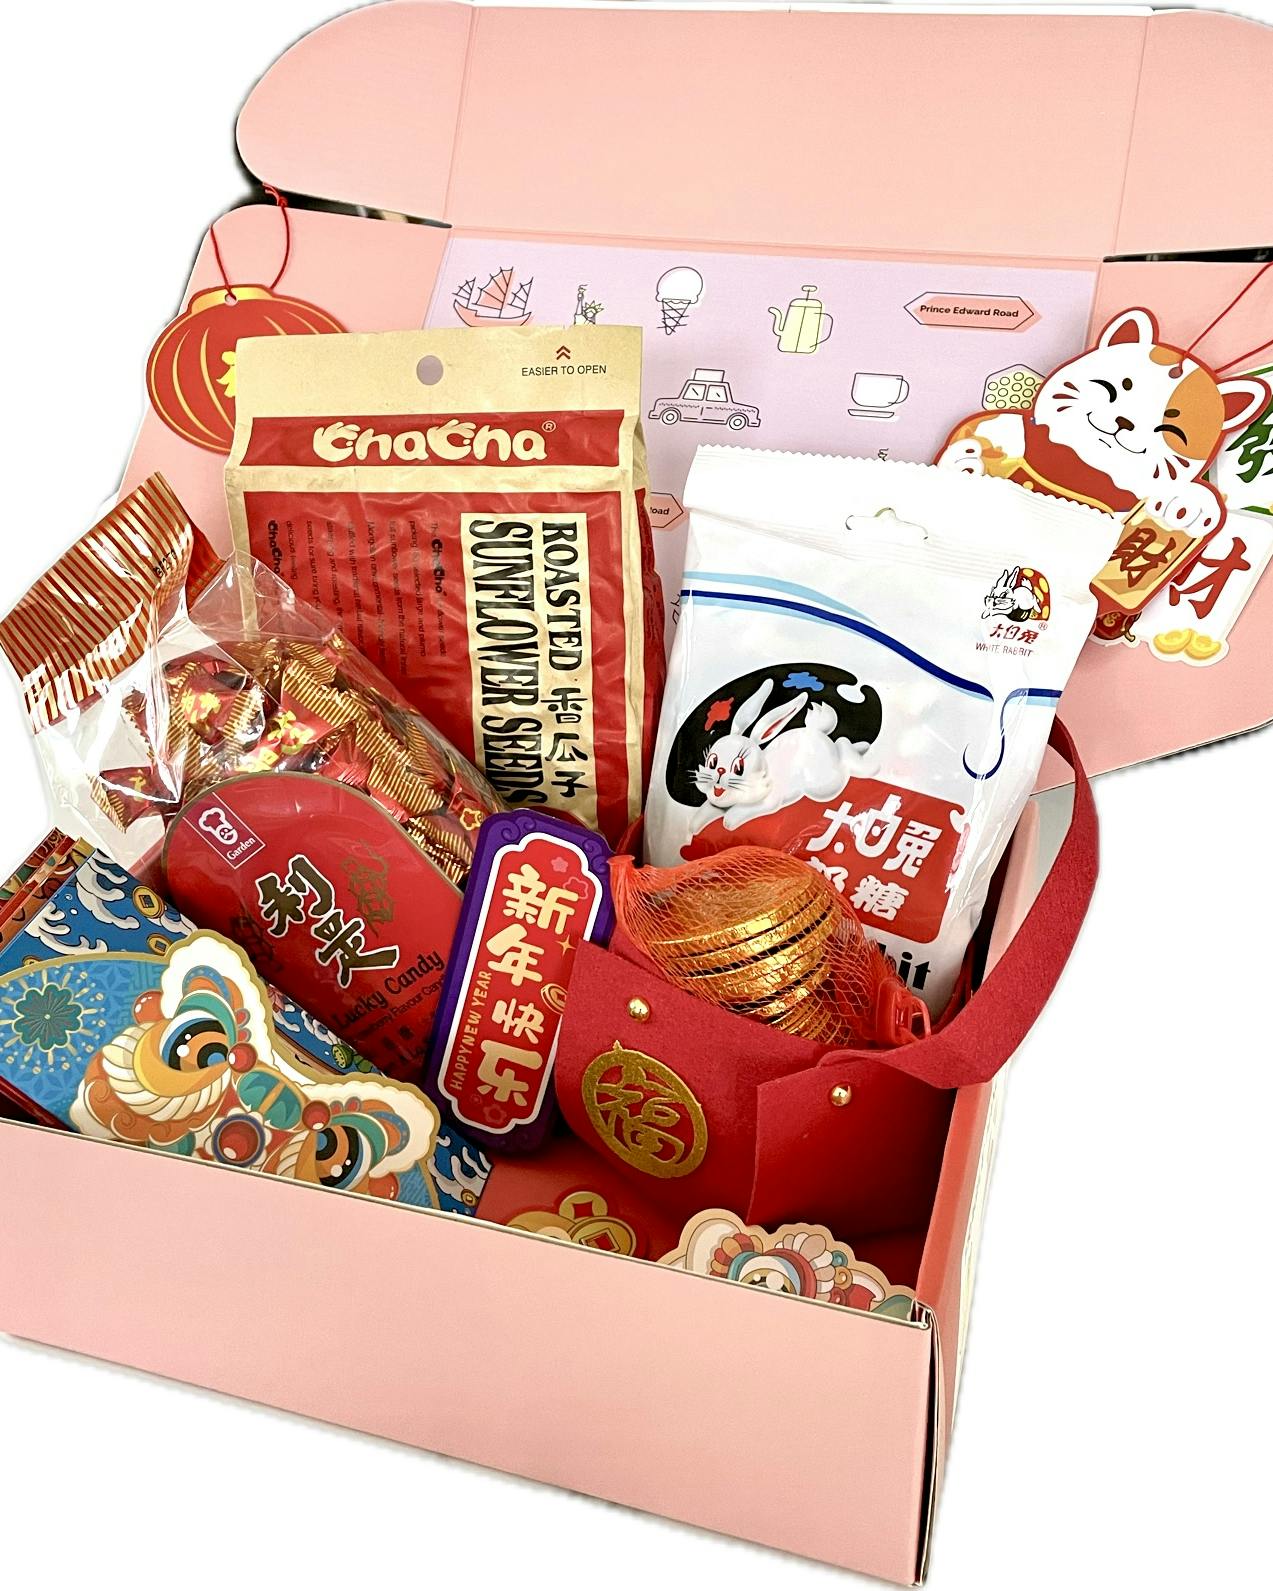 Lunar New Year Food & Gift Delivery, Ship Nationwide